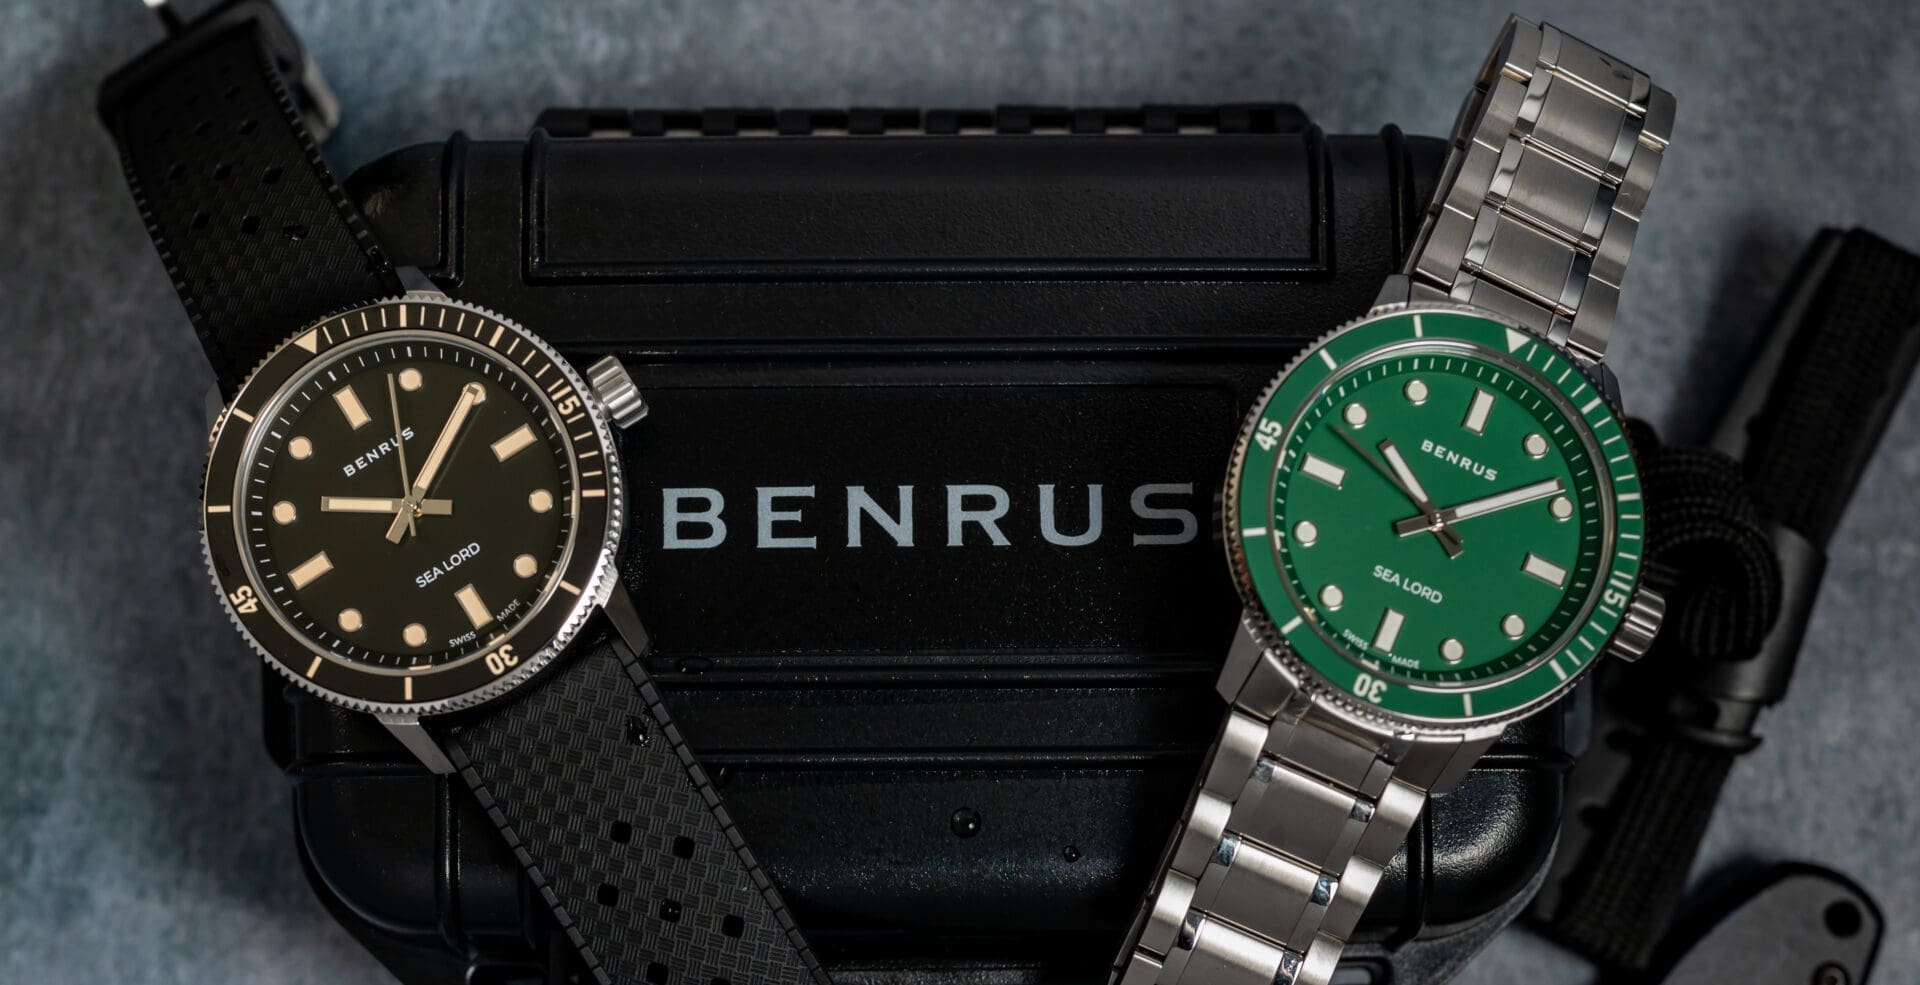 HANDS-ON: Benrus returns to the ’60s to revive the Sea Lord diver